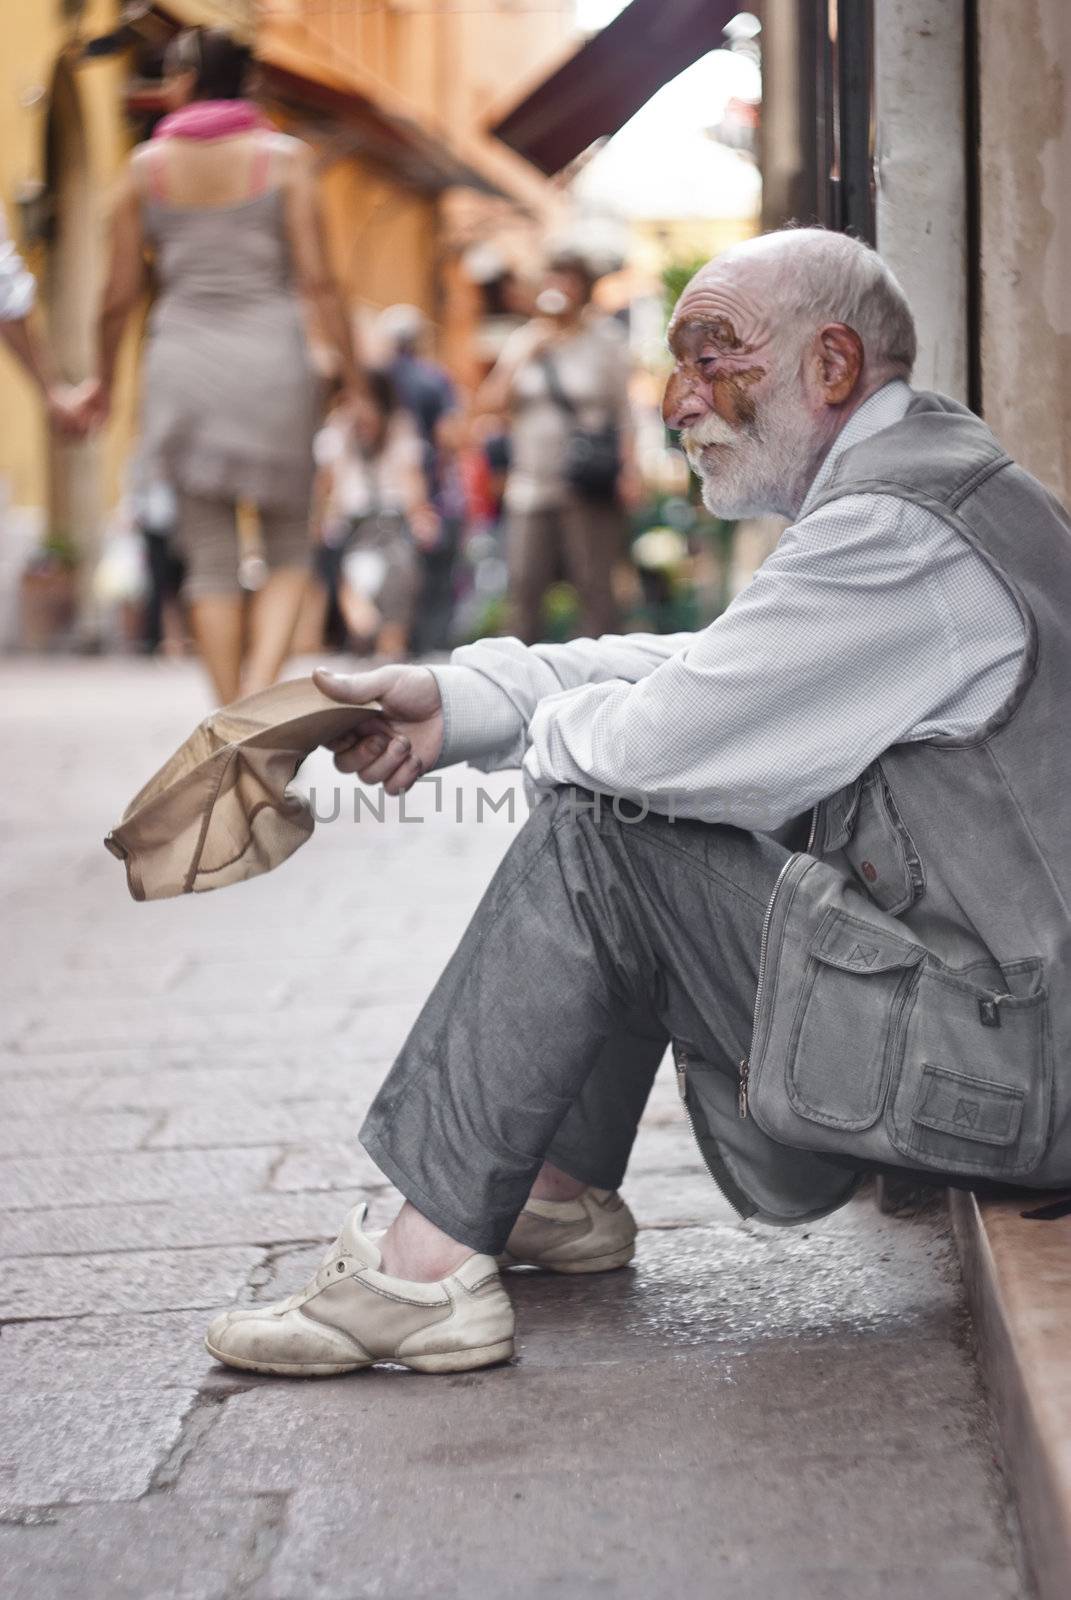 BOLOGNA - JUNE 2012- A homeless old man beggar sitting on the street and asking for help on  May 14, 2011 in BOLOGNA, Italy.